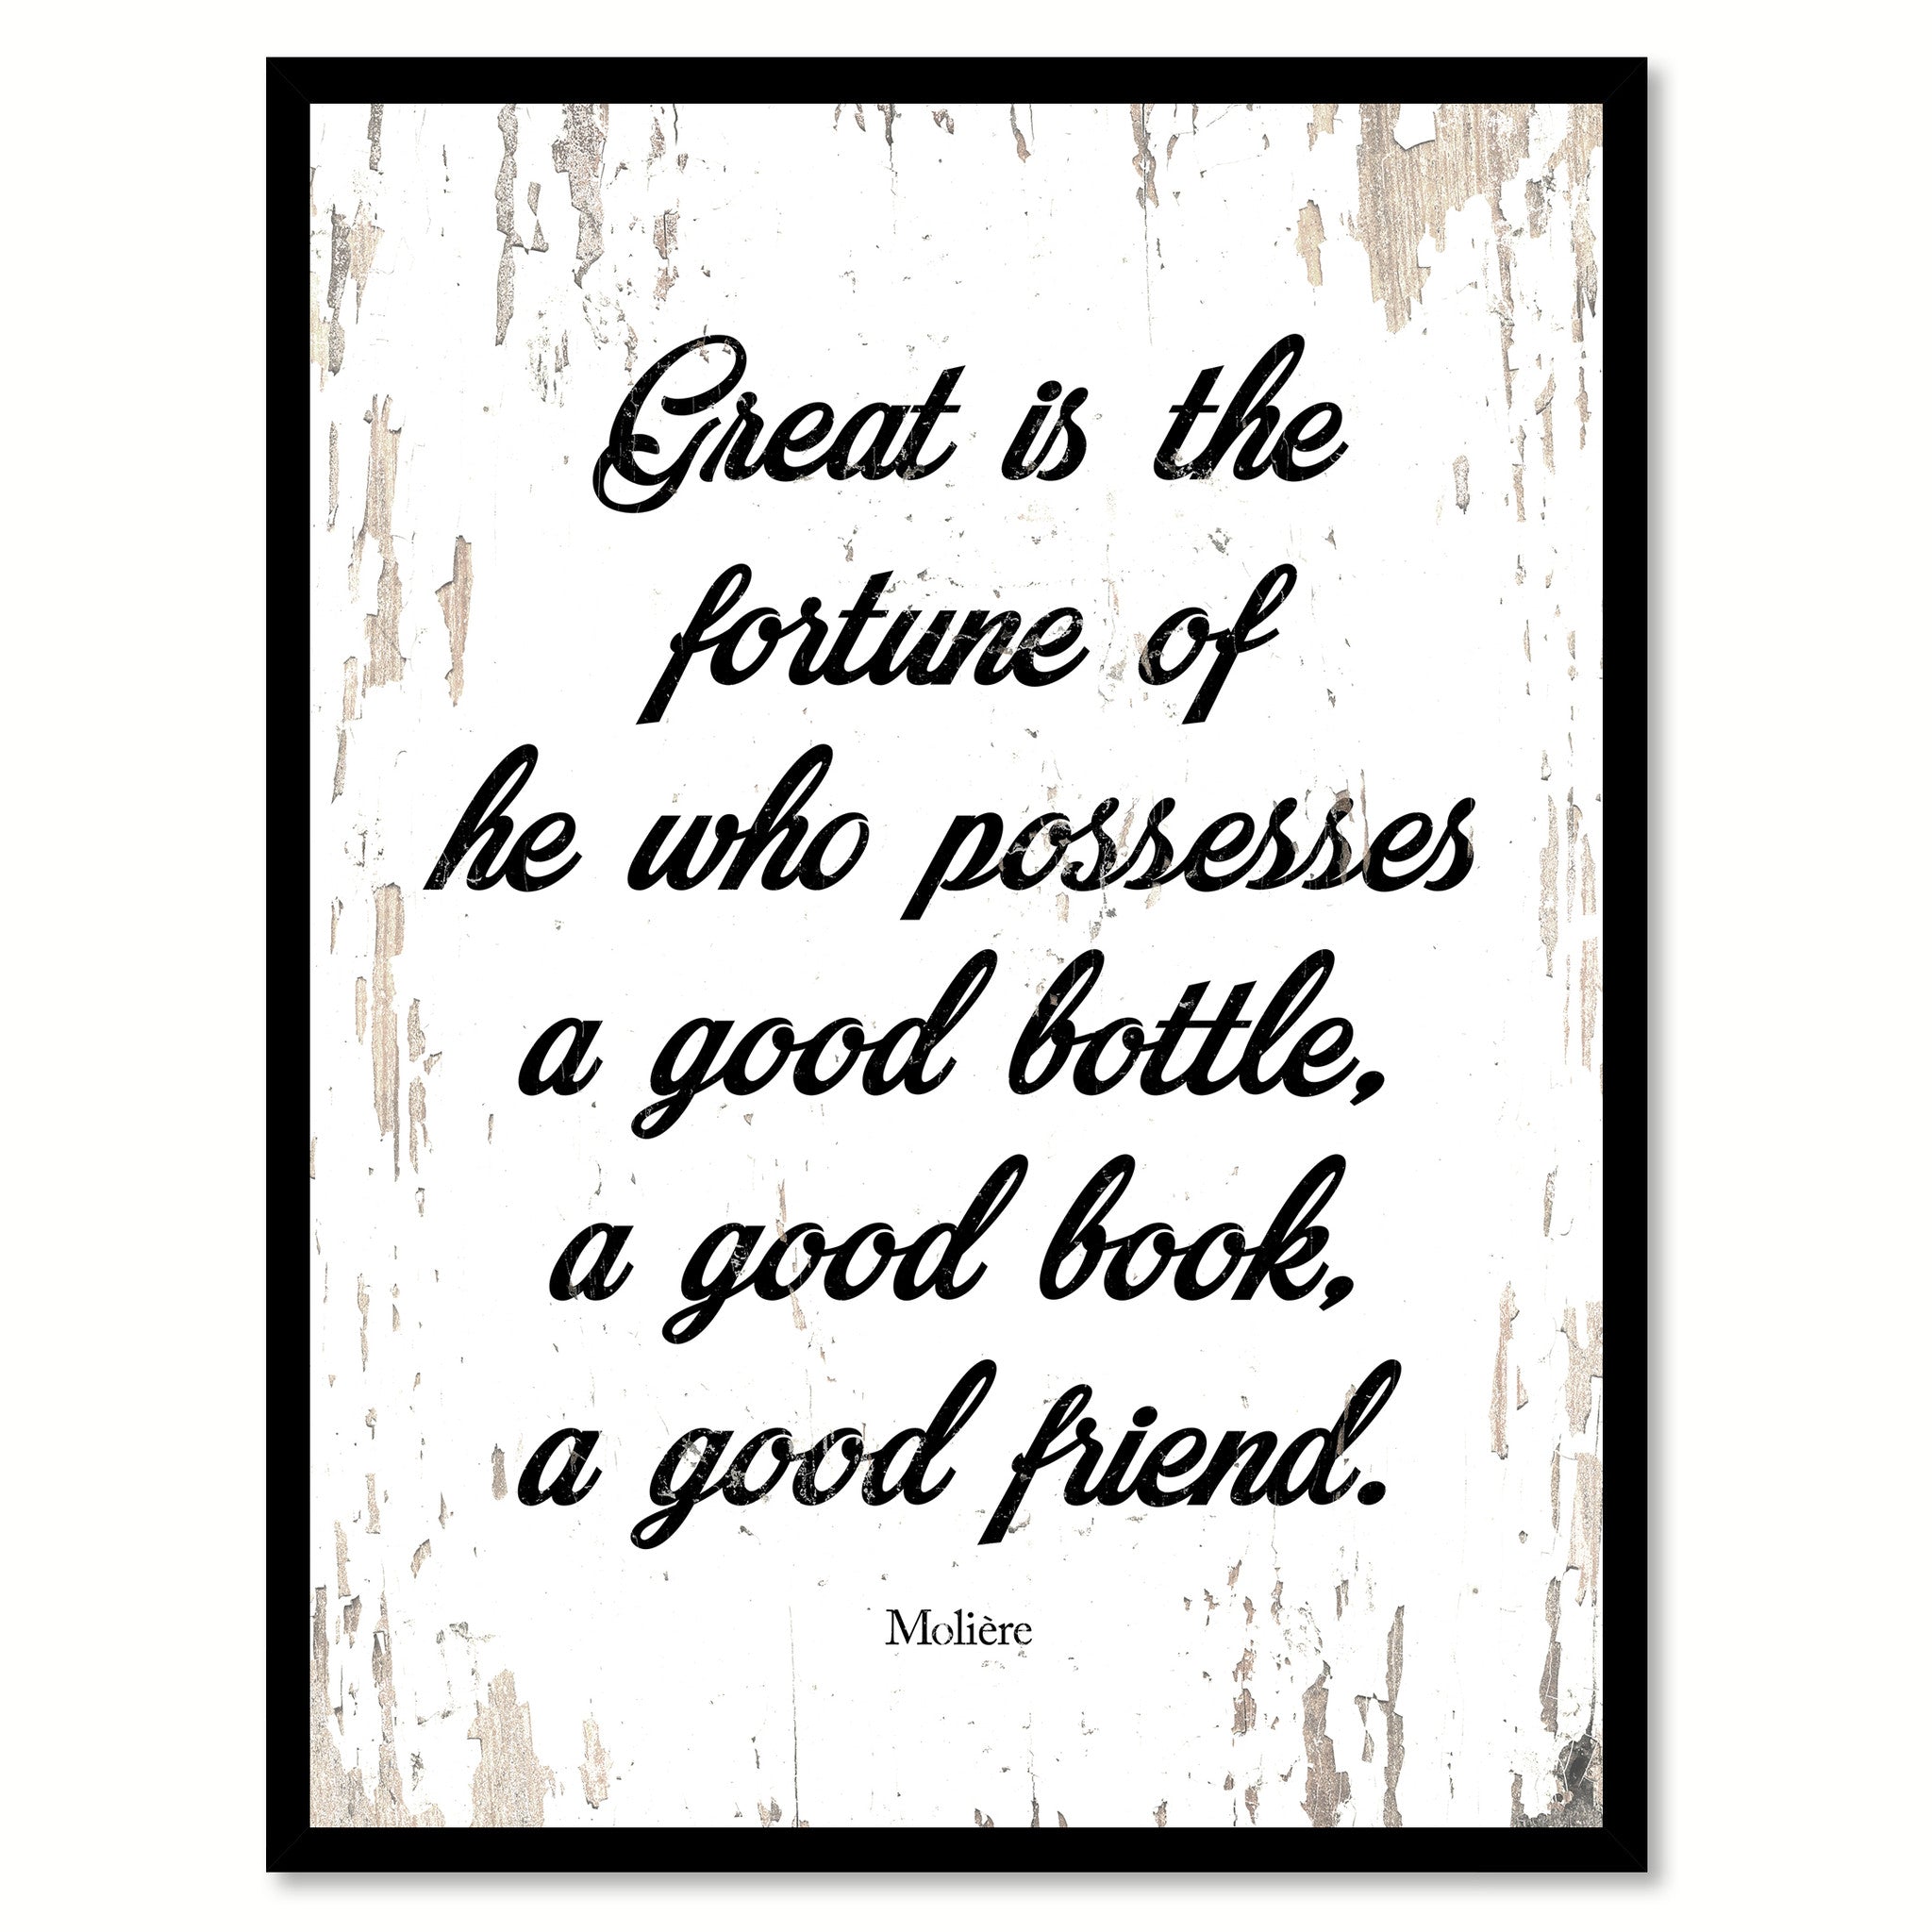 Great Is The Fortune Of He Who Possesses a Good Bottle a Good Book a Good Friend Quote Saying Canvas Print with Picture Frame